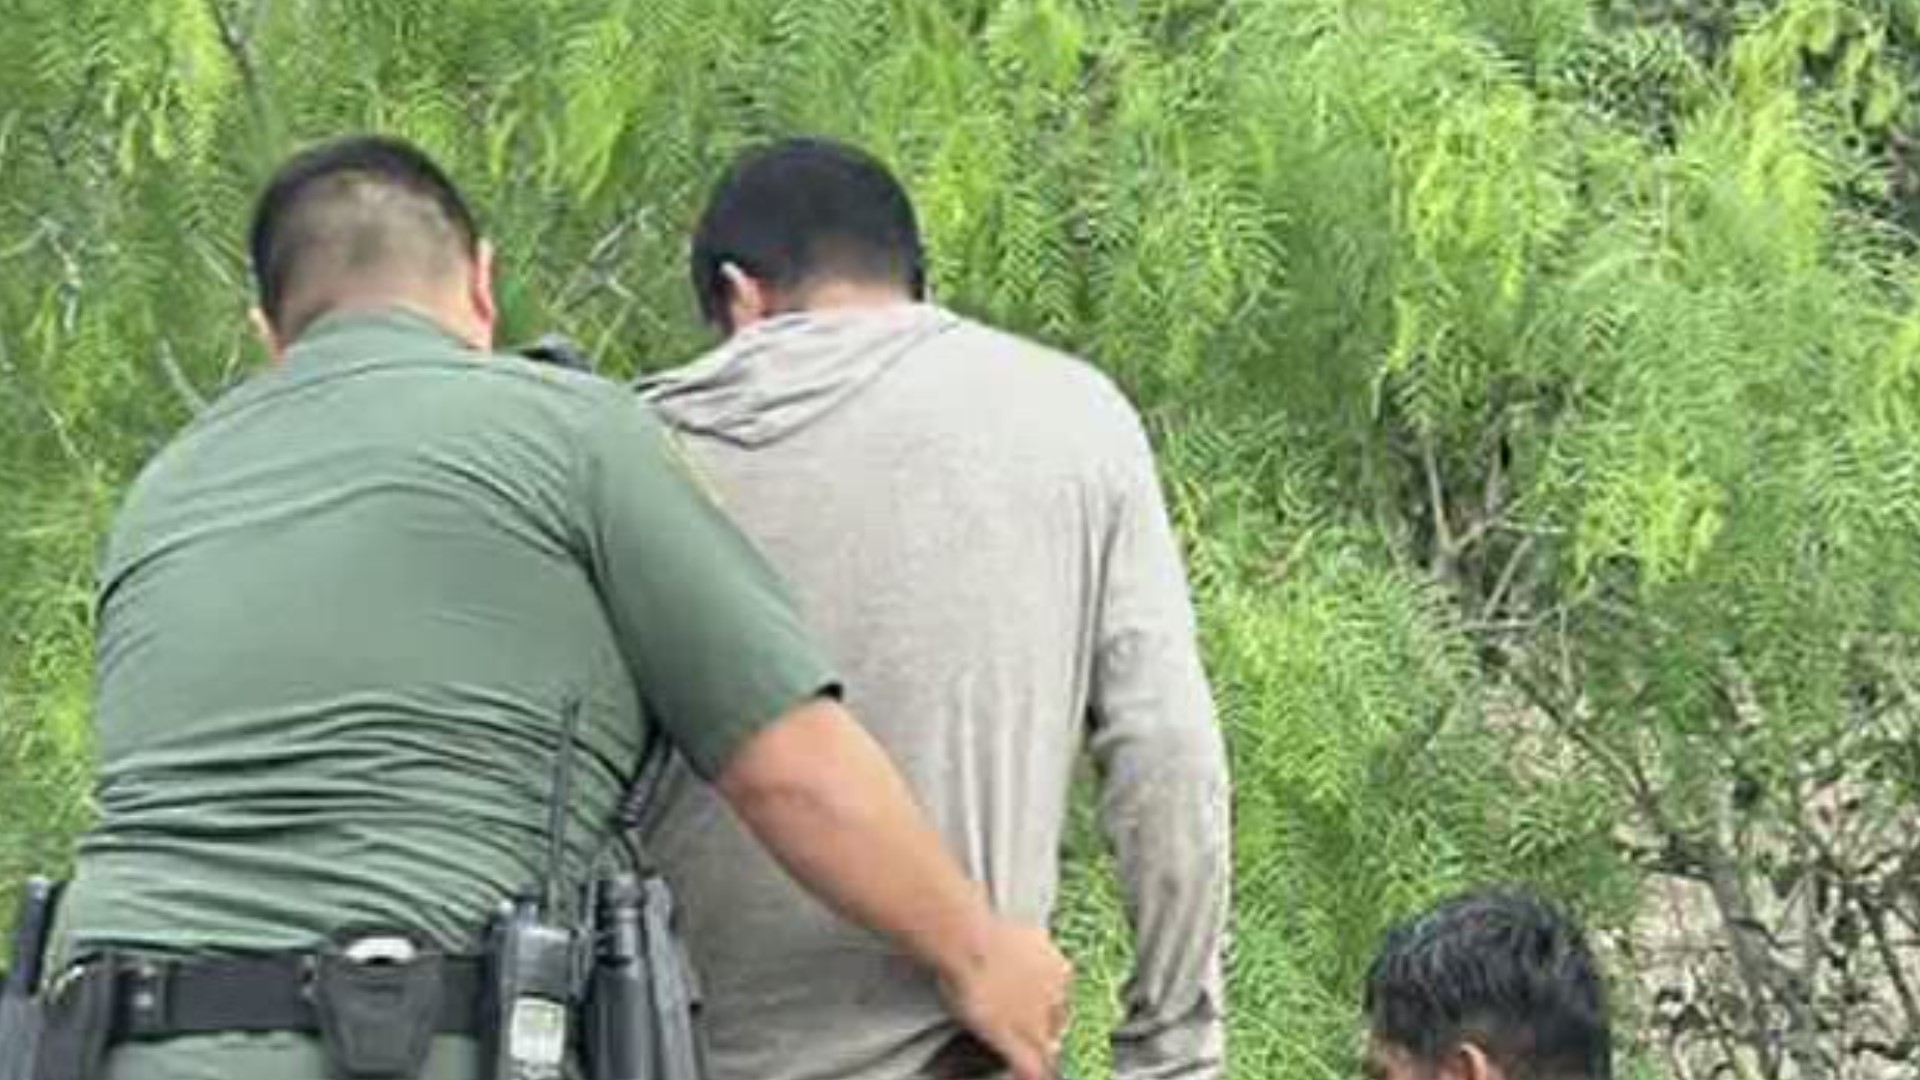 45 migrant bodies have been found in Brooks County this year.